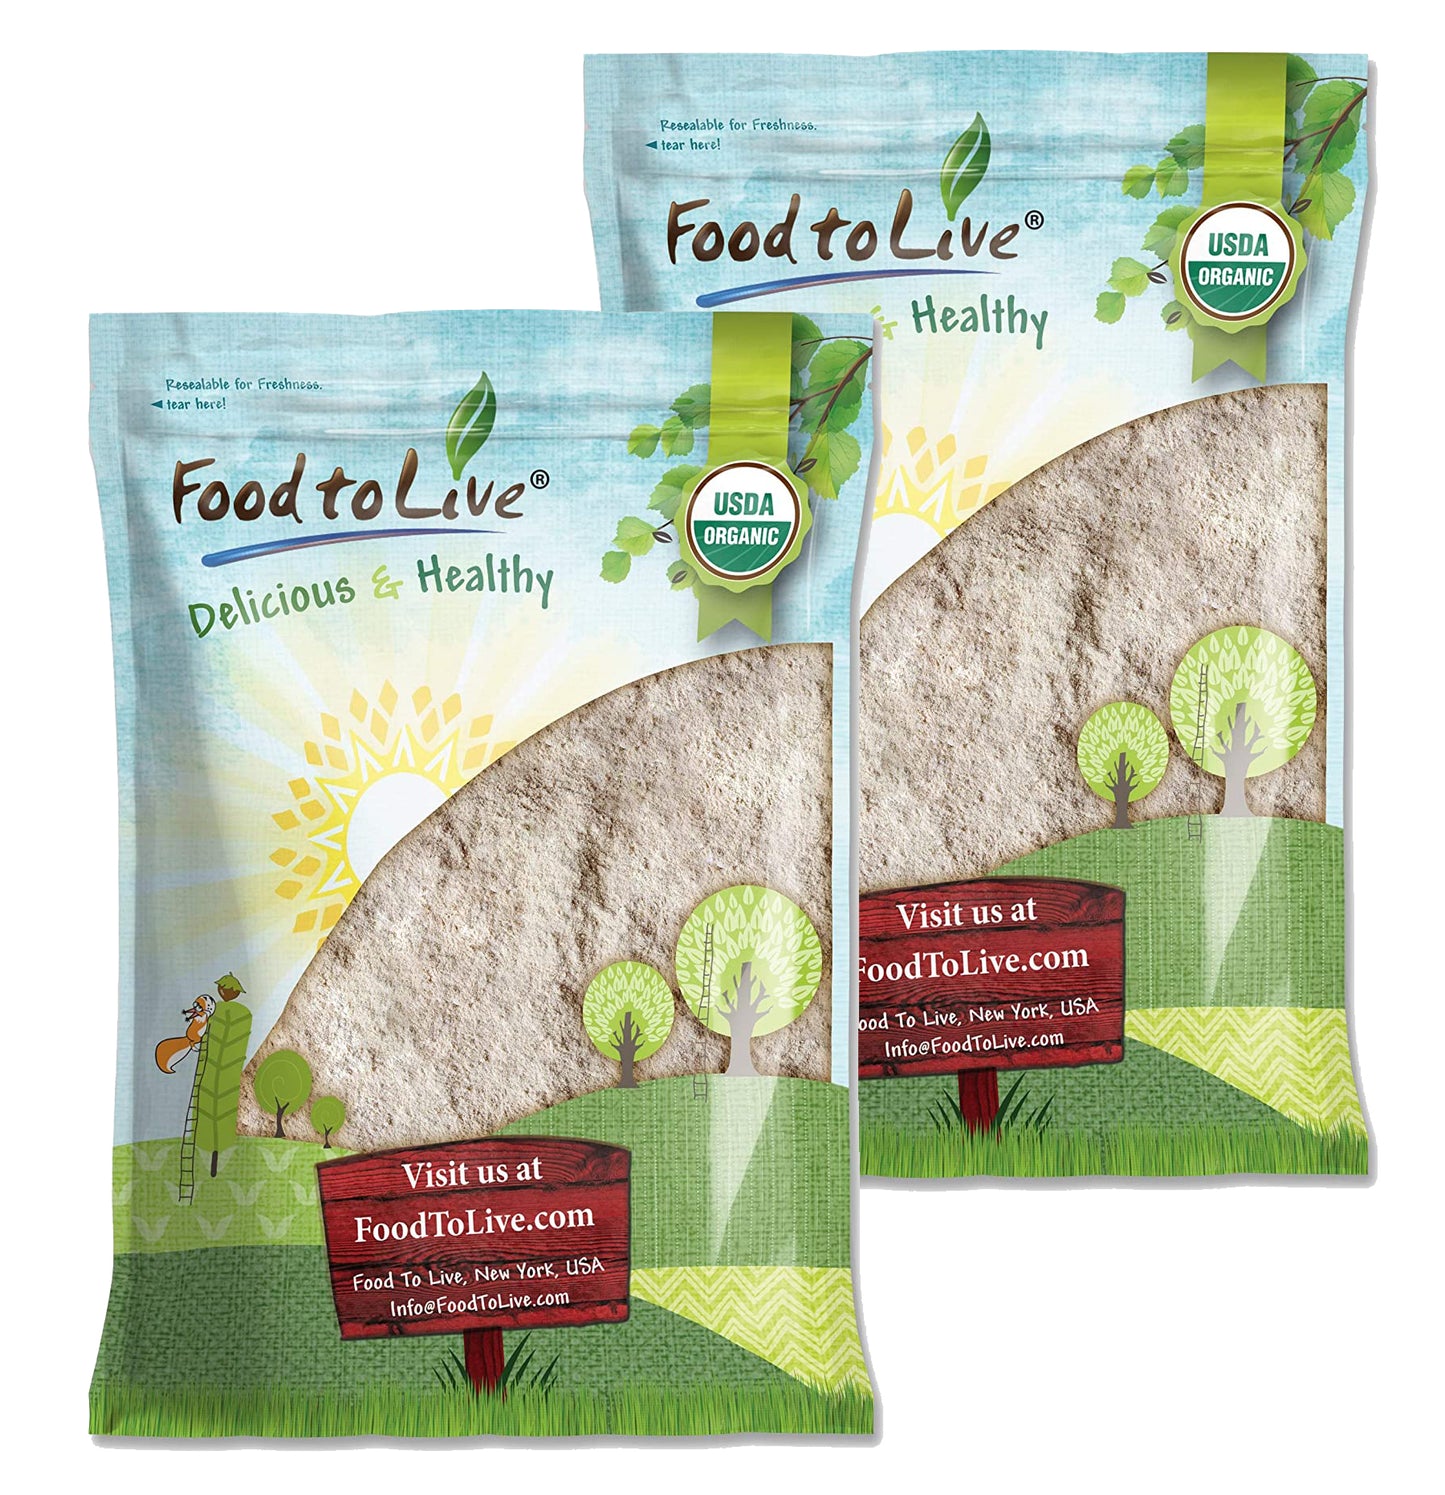 Organic Barley Flour - Stone Ground from Whole Hulled Barley, Non-GMO, Raw, Vegan, Bulk, Great for Baking - by Food to Live